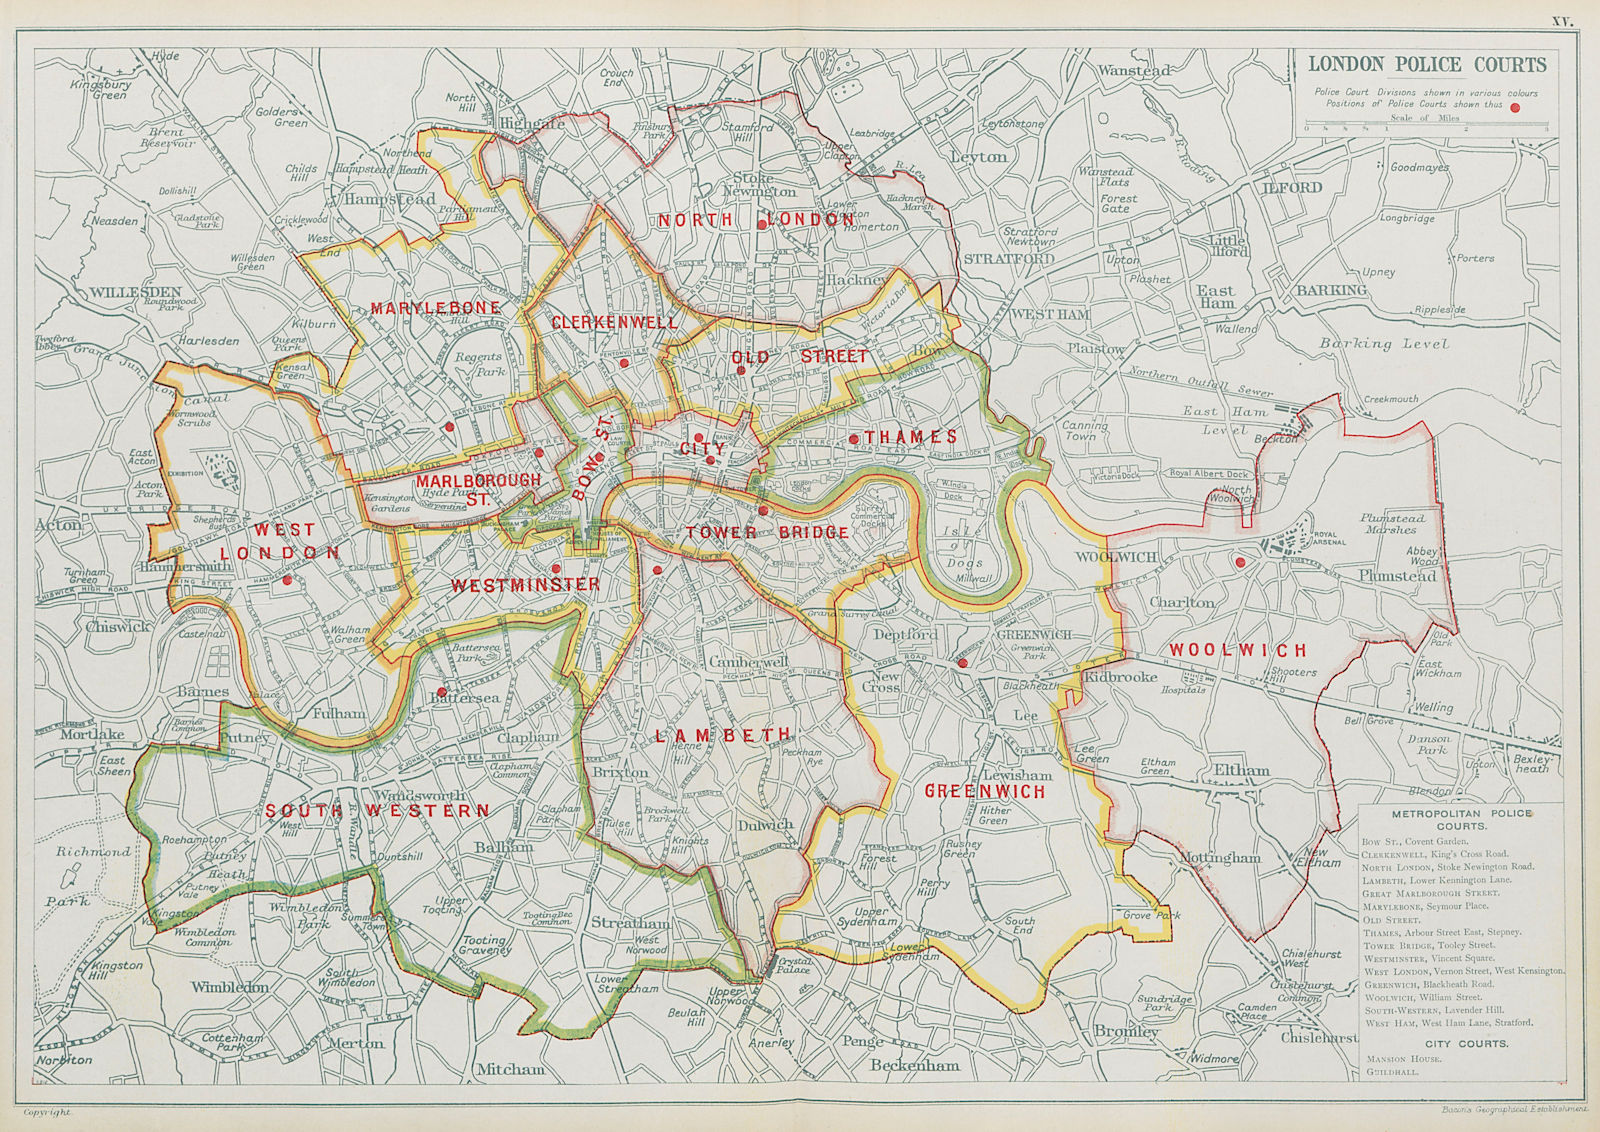 LONDON POLICE COURTS. Showing divisions & court locations. BACON 1913 old map